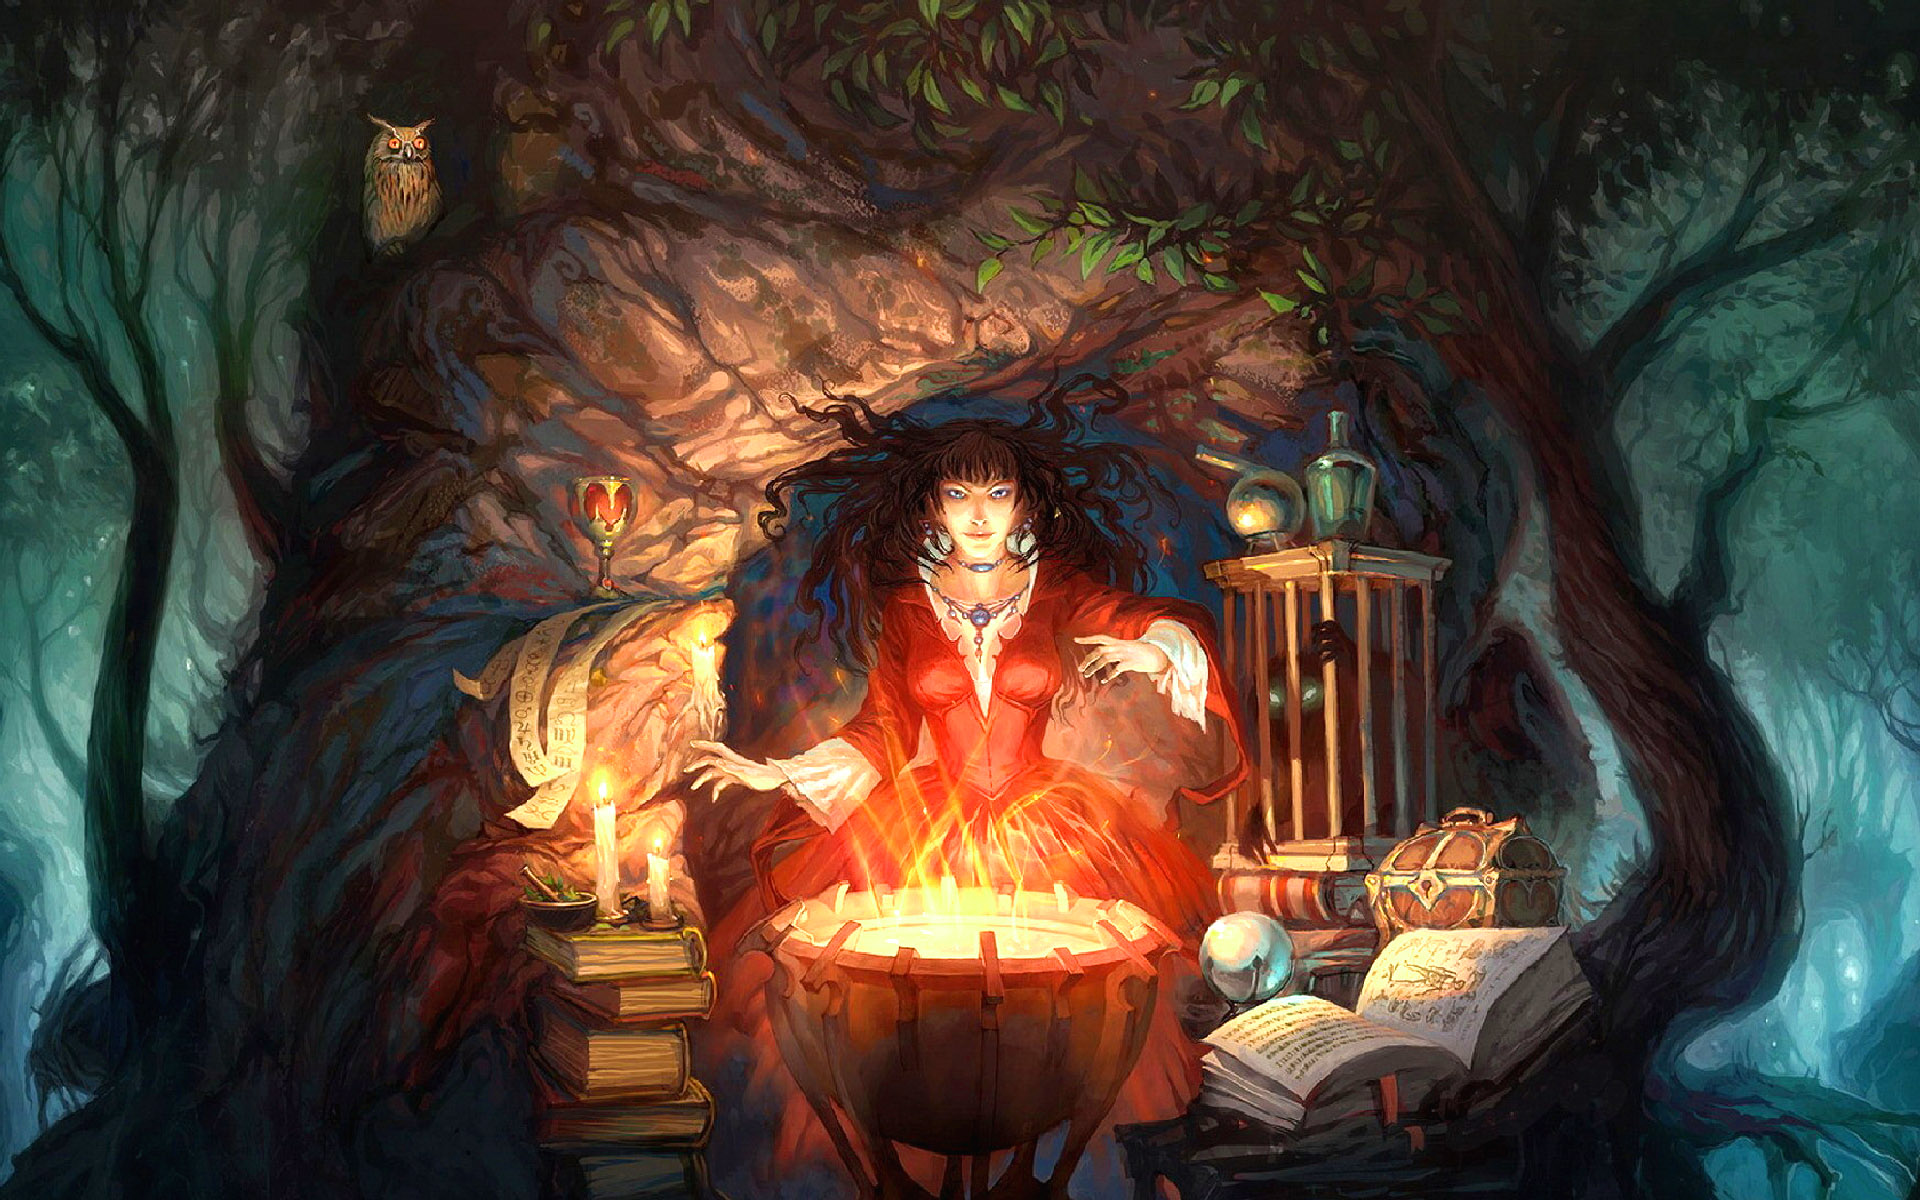 A mystical and enchanting scene featuring a working witch in a fantasy setting.